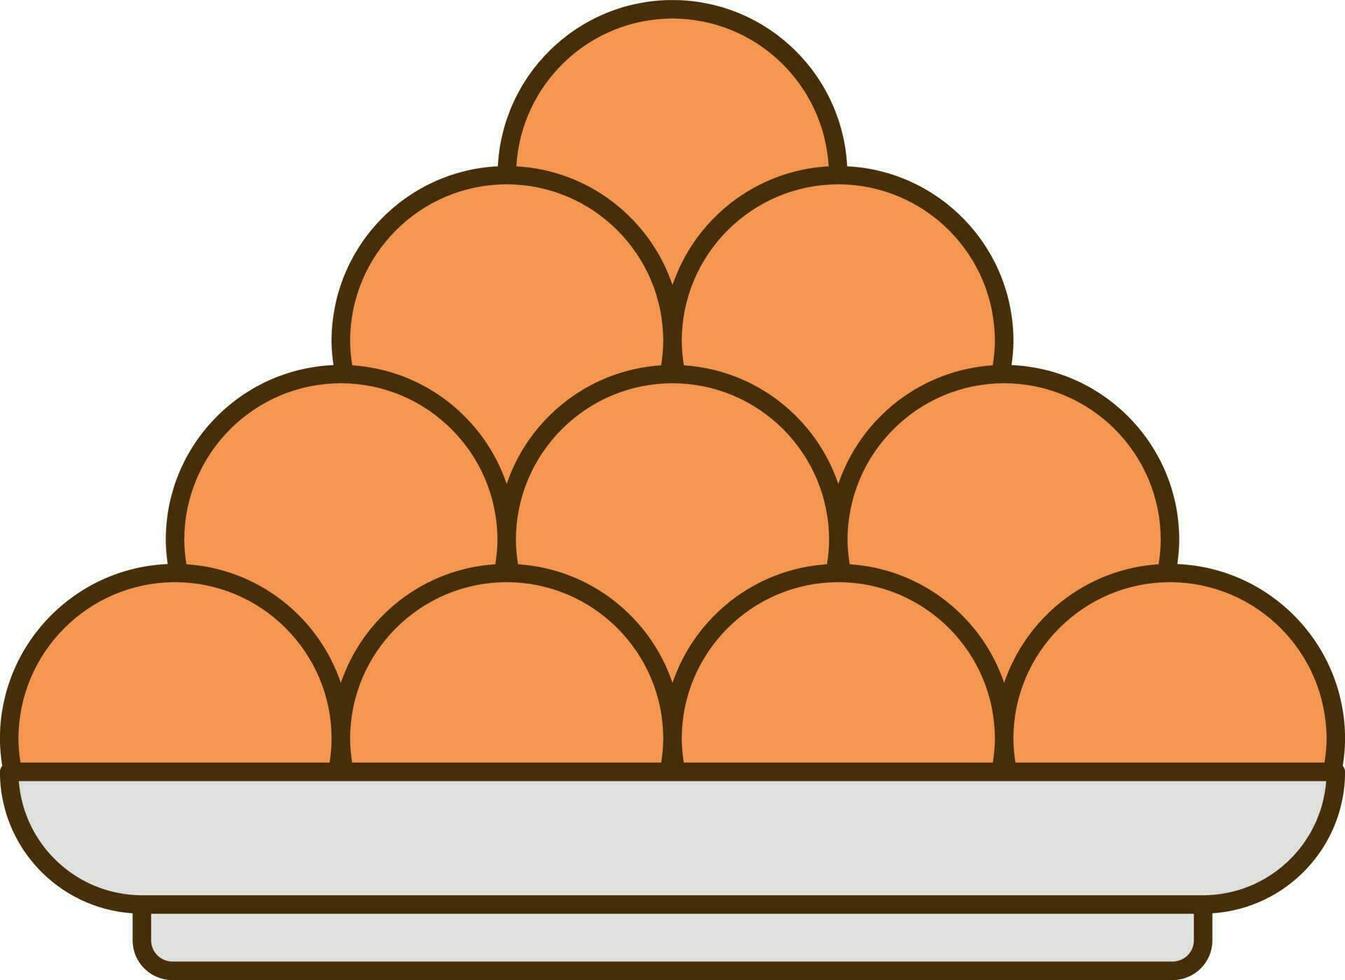 Orange Sweets Ball Plate Flat Icon. vector